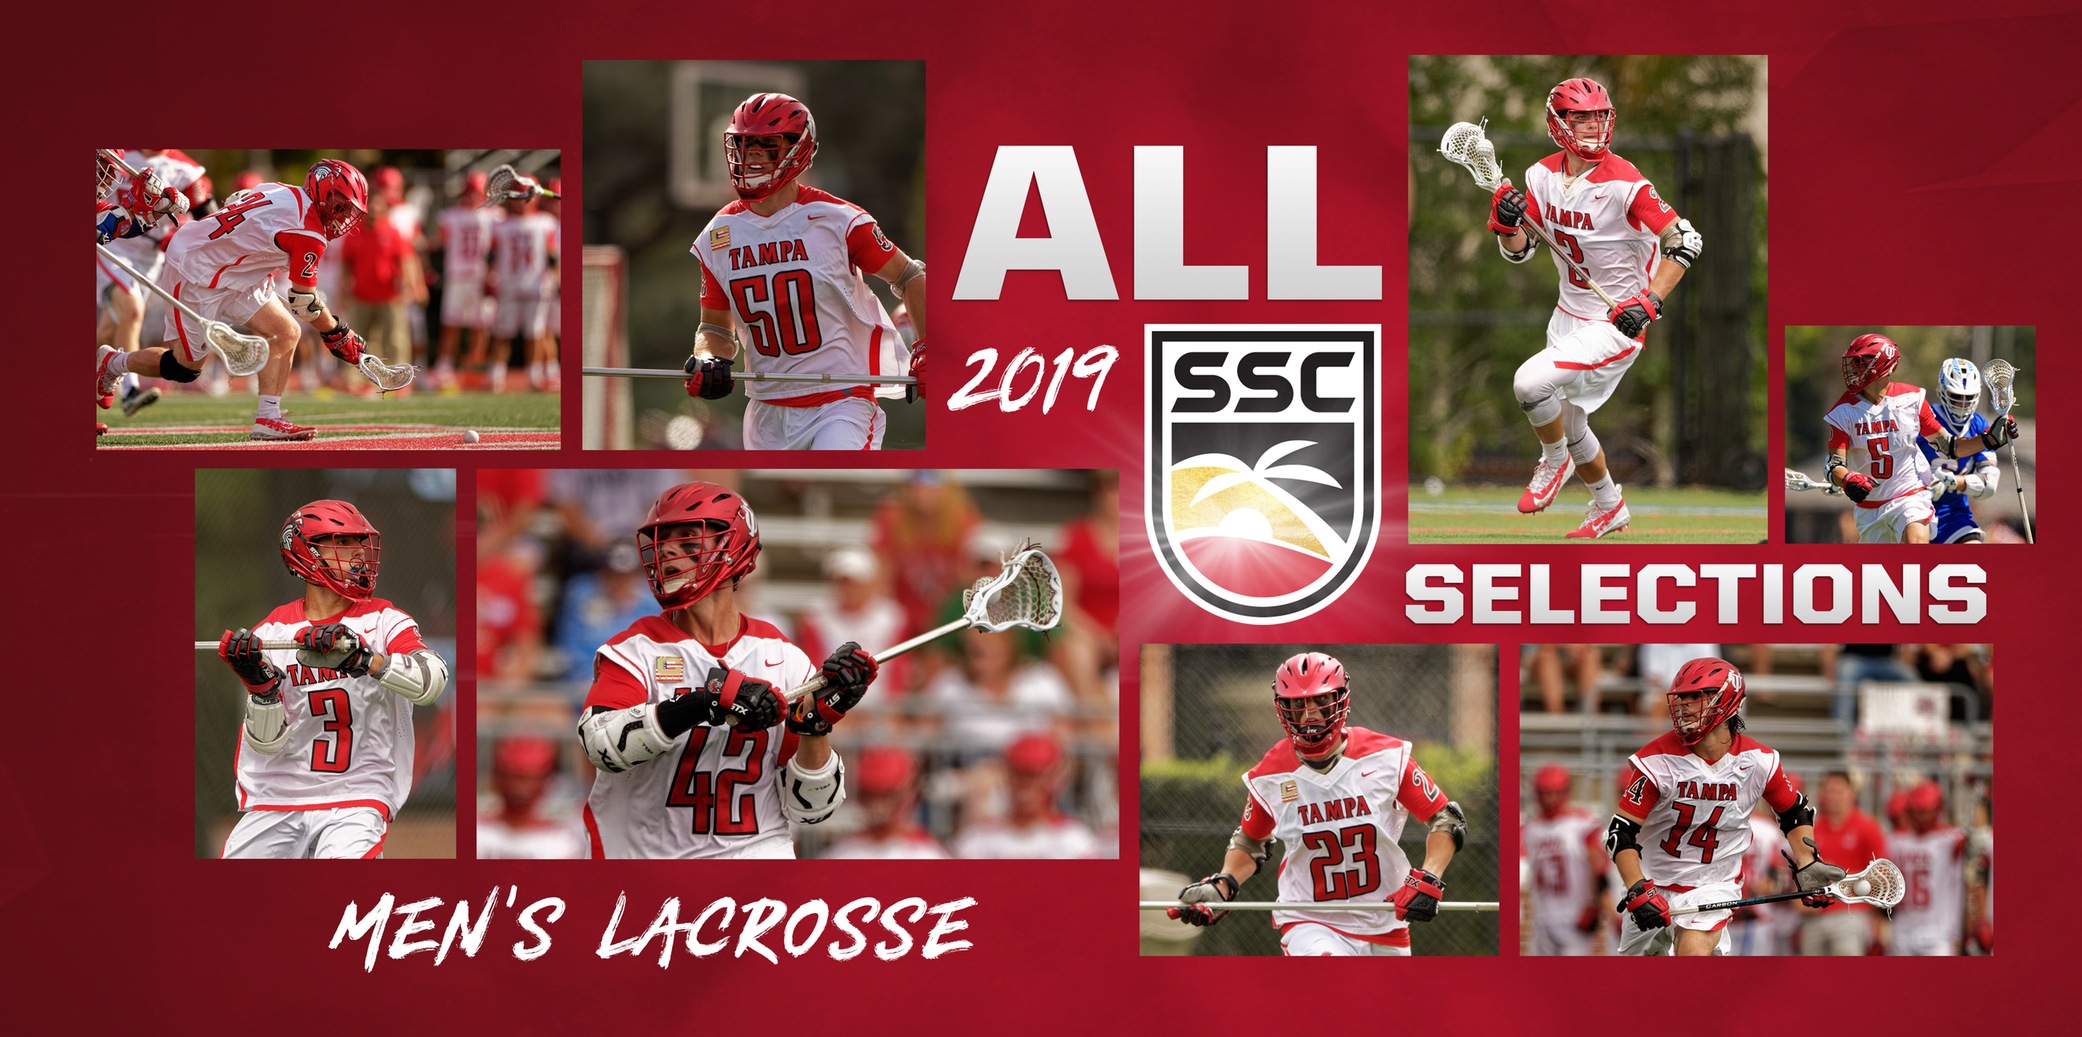 2019 ALL-SSC Selections, Andrew Kew Earns Player of the Year